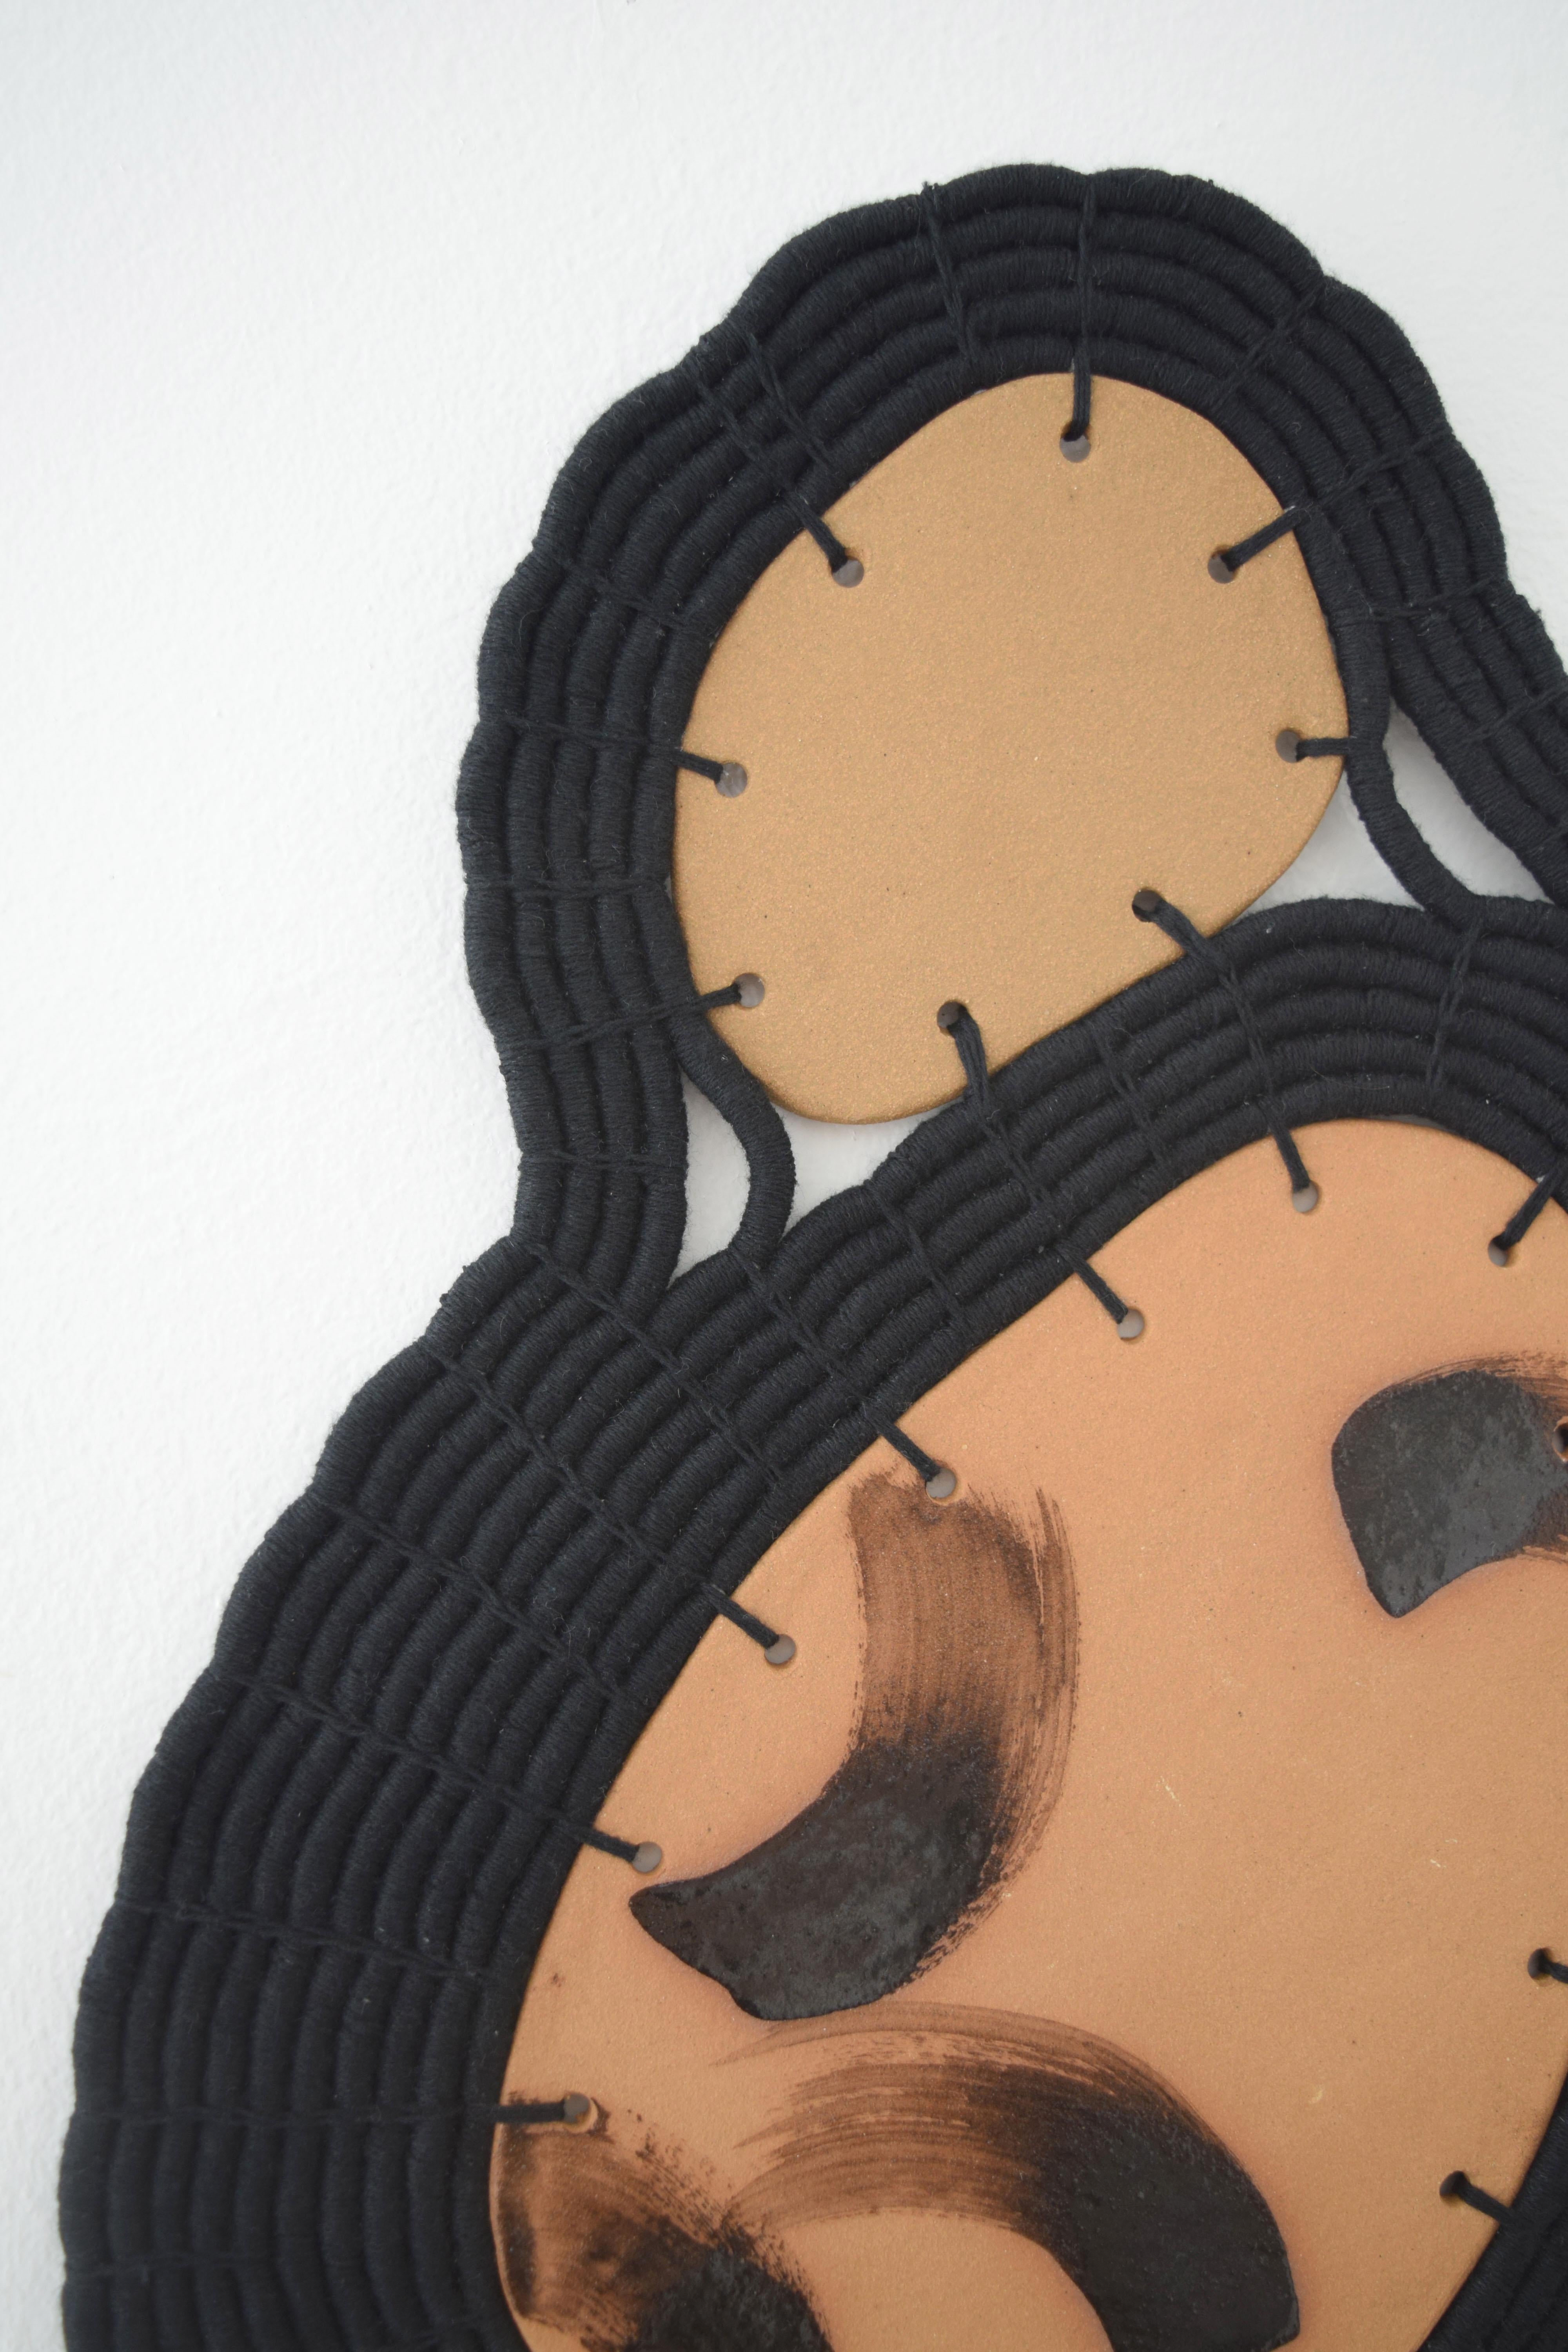 Hand-Crafted One of a Kind Ceramic and Woven Cotton Wall Sculpture in Black and Natural